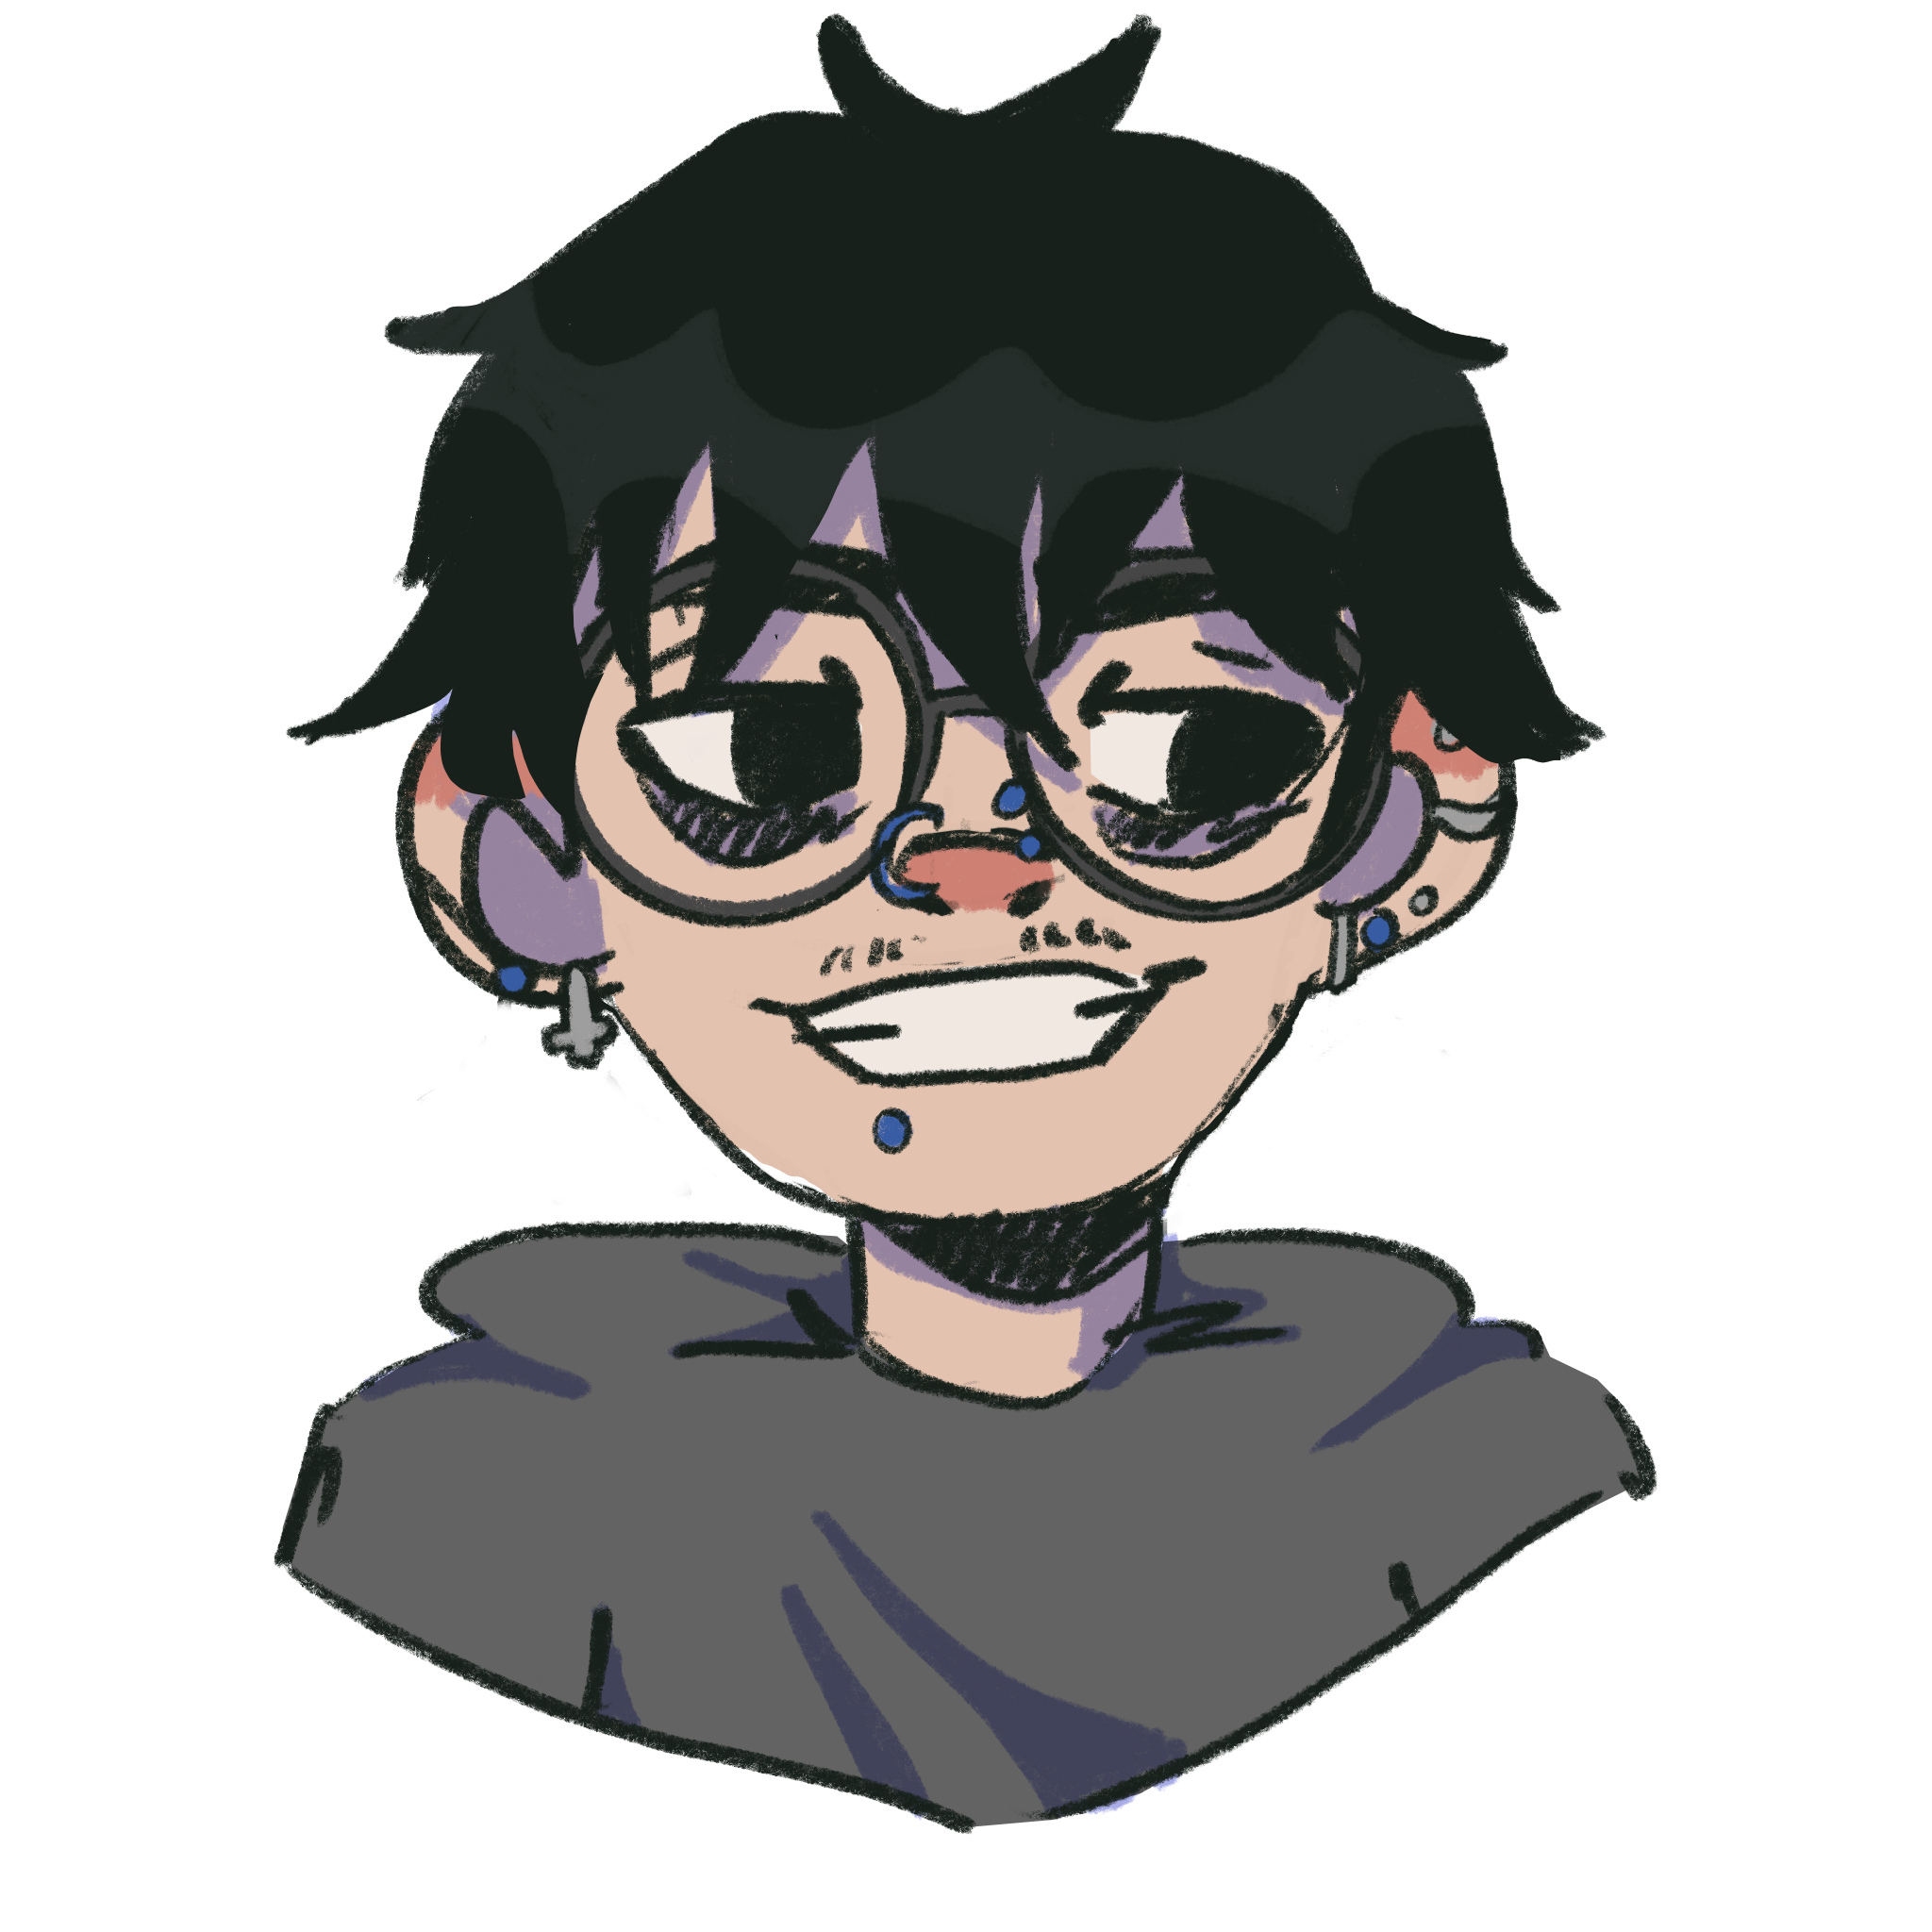 a self-portrait from the shoulders up in a very stylised cartoon style. i have messy short black hair, glasses, and am wearing a grey hoodie. i have lots of blue and silver earrings, and blue face jewellery: one nose hoop on the left, two nose studs on the right, and a lip piercing on the left. i am smiling wide and looking to the right